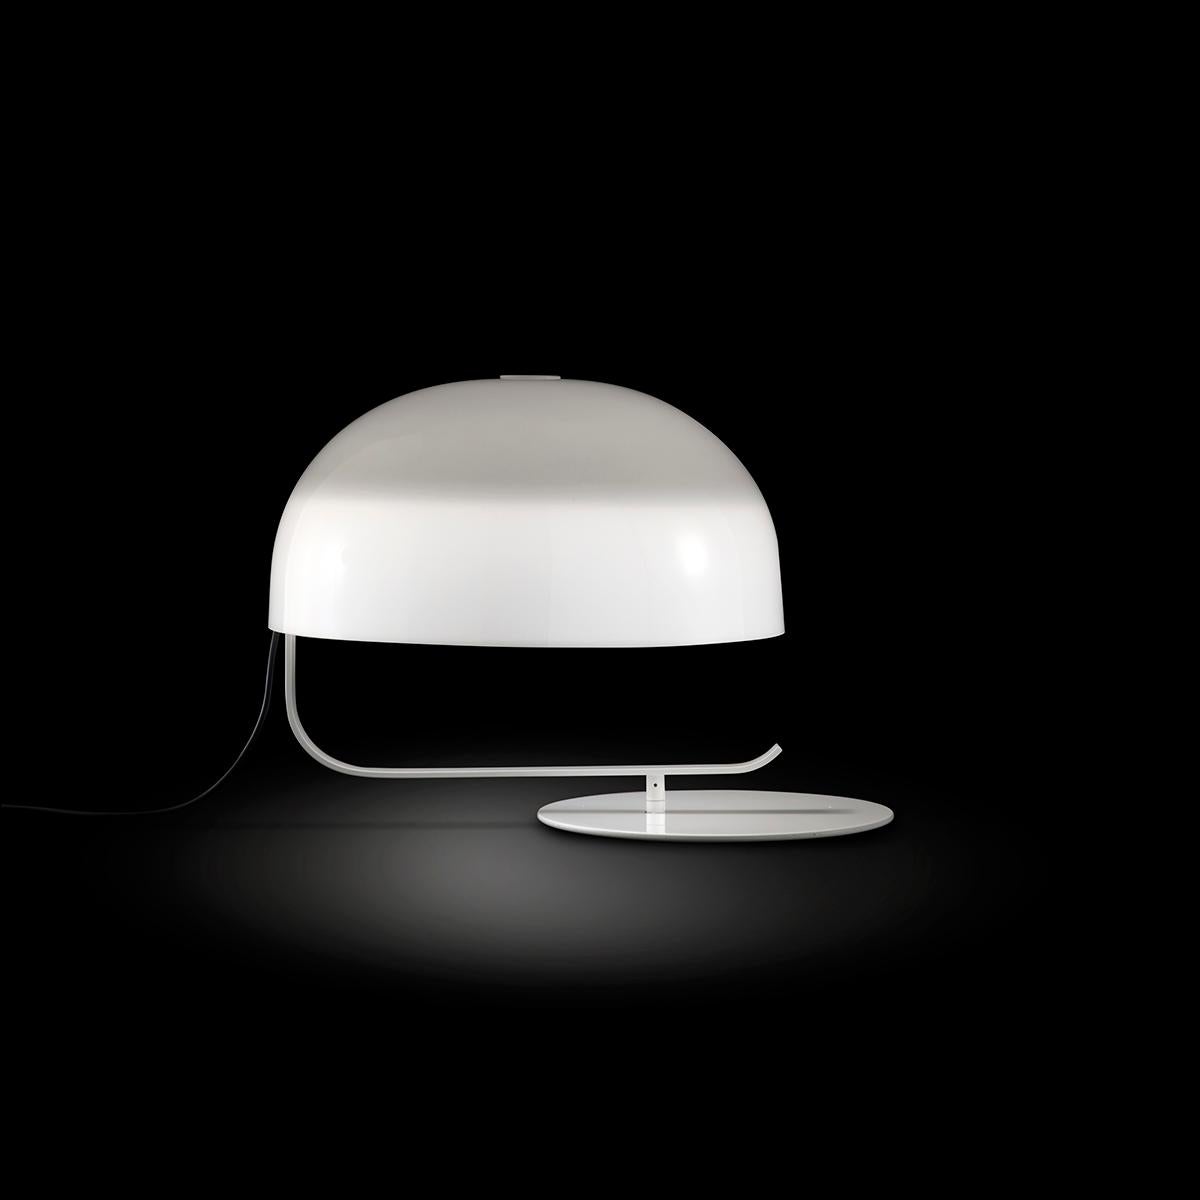 Table lamp 'Zanuso' designed by Marco Zanuso in 2013.
Table lamp giving diffused light. Opal PMMA diffuser rotating on the base. Painted metal curved support and base.
Manufactured by Oluce, Italy.

In 1963, Marco Zanuso designed the model 275